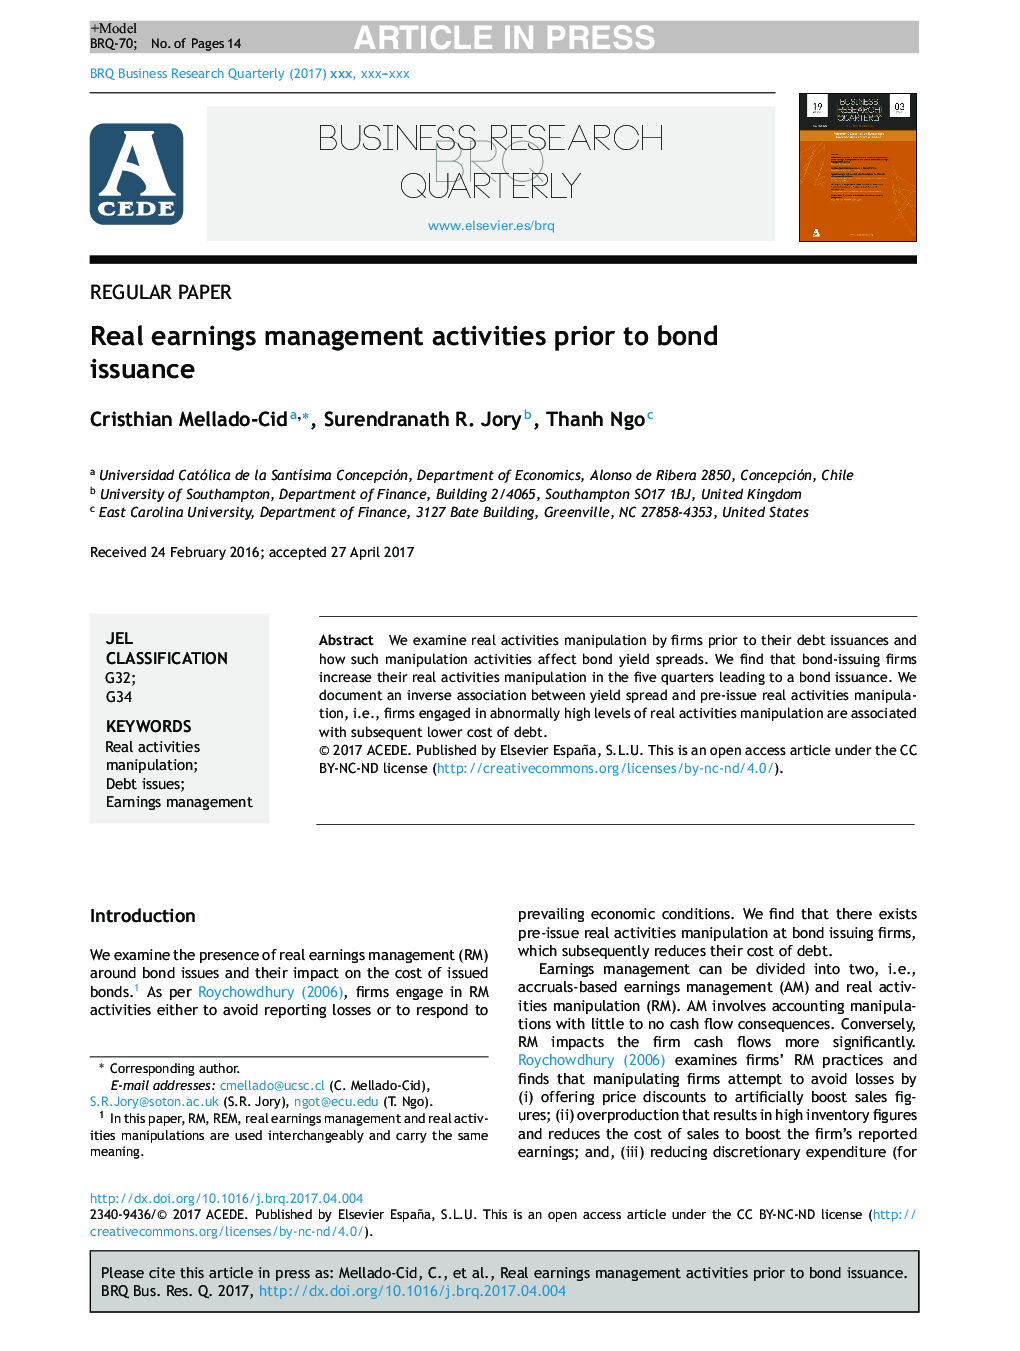 Real earnings management activities prior to bond issuance